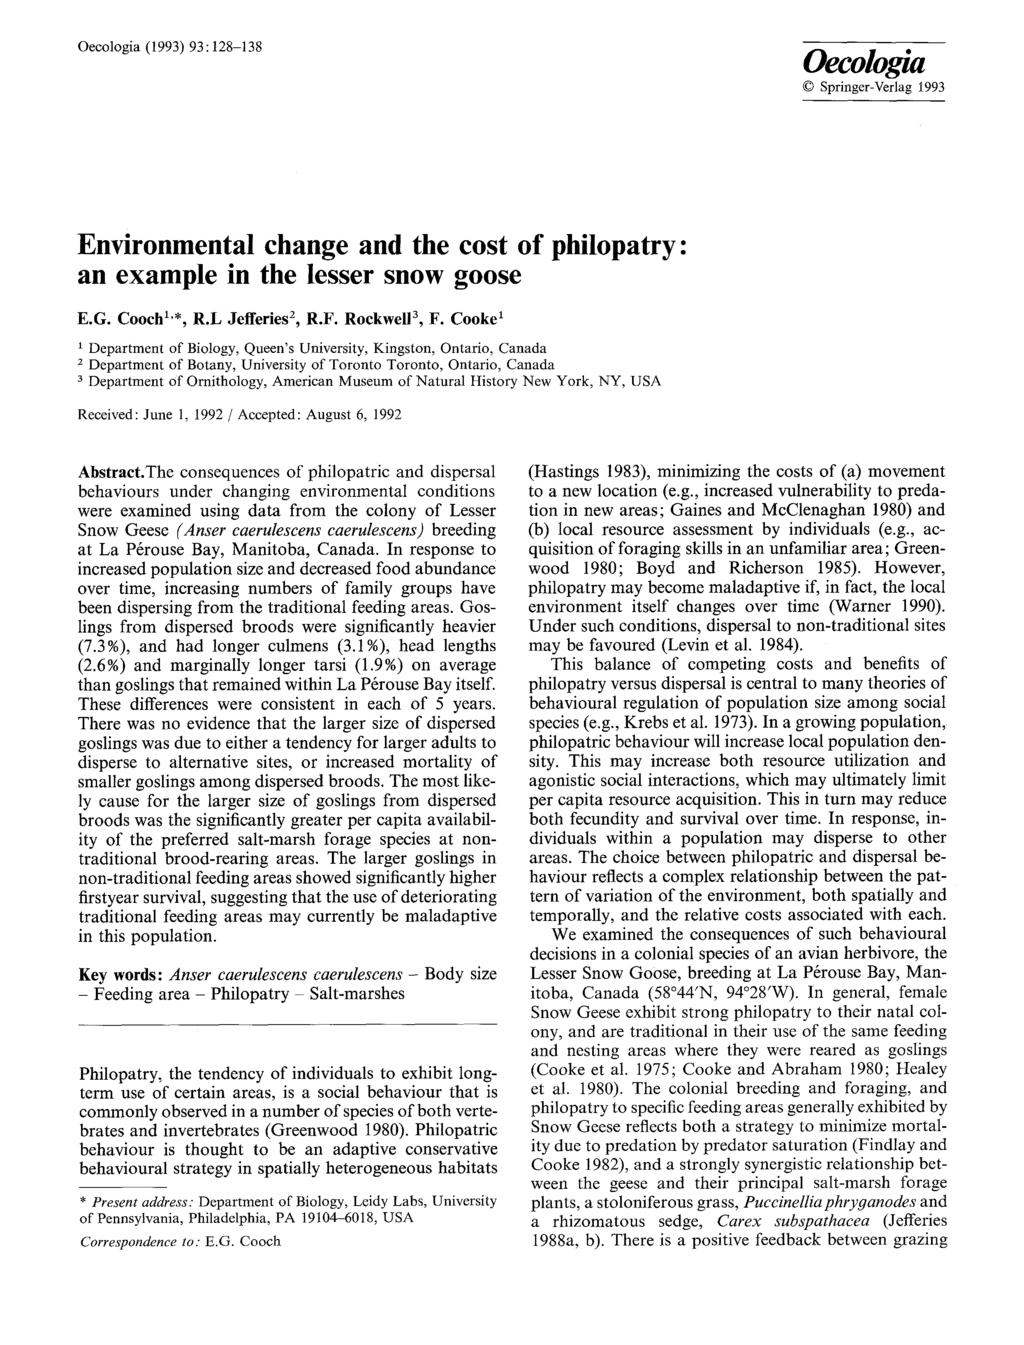 Oecologia (1993) 93:128-138 Oecologia 9 Springer-Verlag 1993 Environmental change and the cost of philopatry: an example in the lesser snow goose E.G. Cooch 1'*, R.L Jefferies 2, R.F. RoekwelP, F.